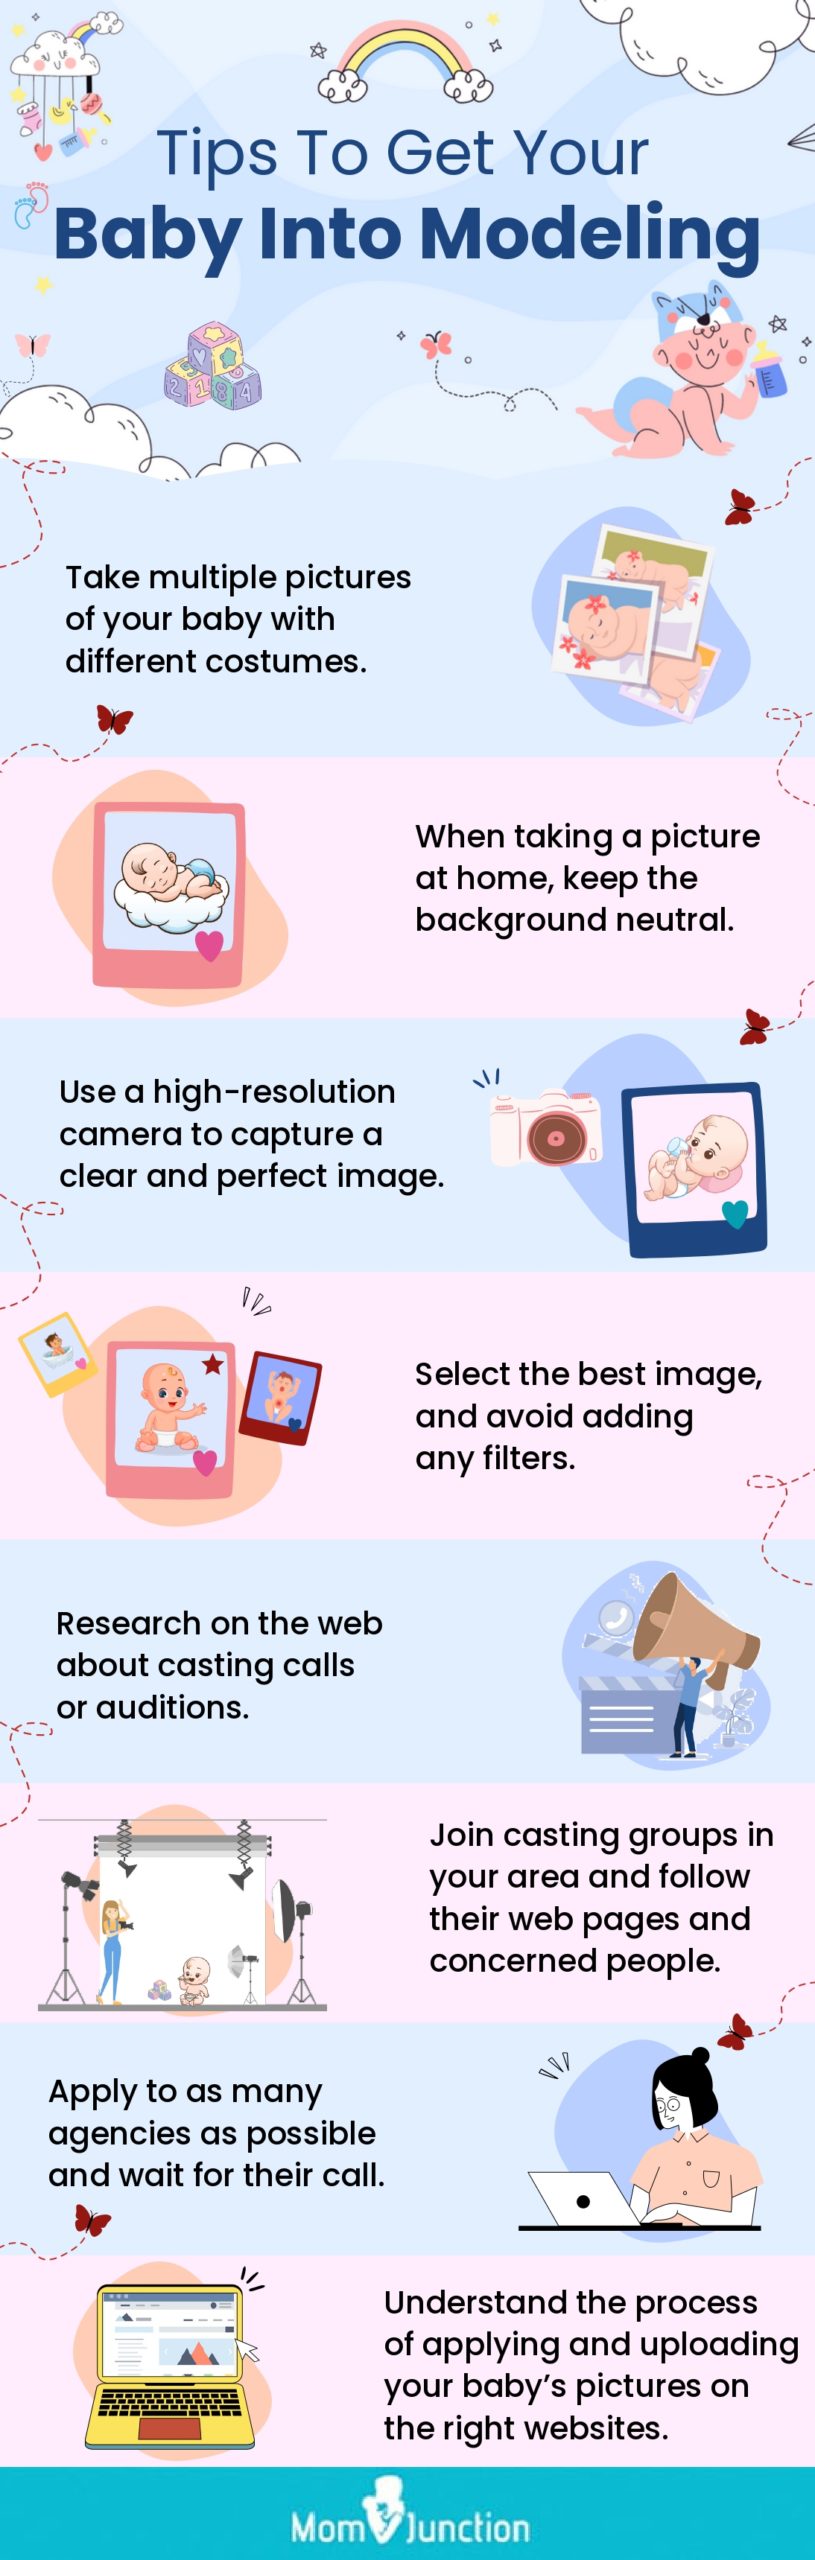 tips to get your baby into modeling [infographic]